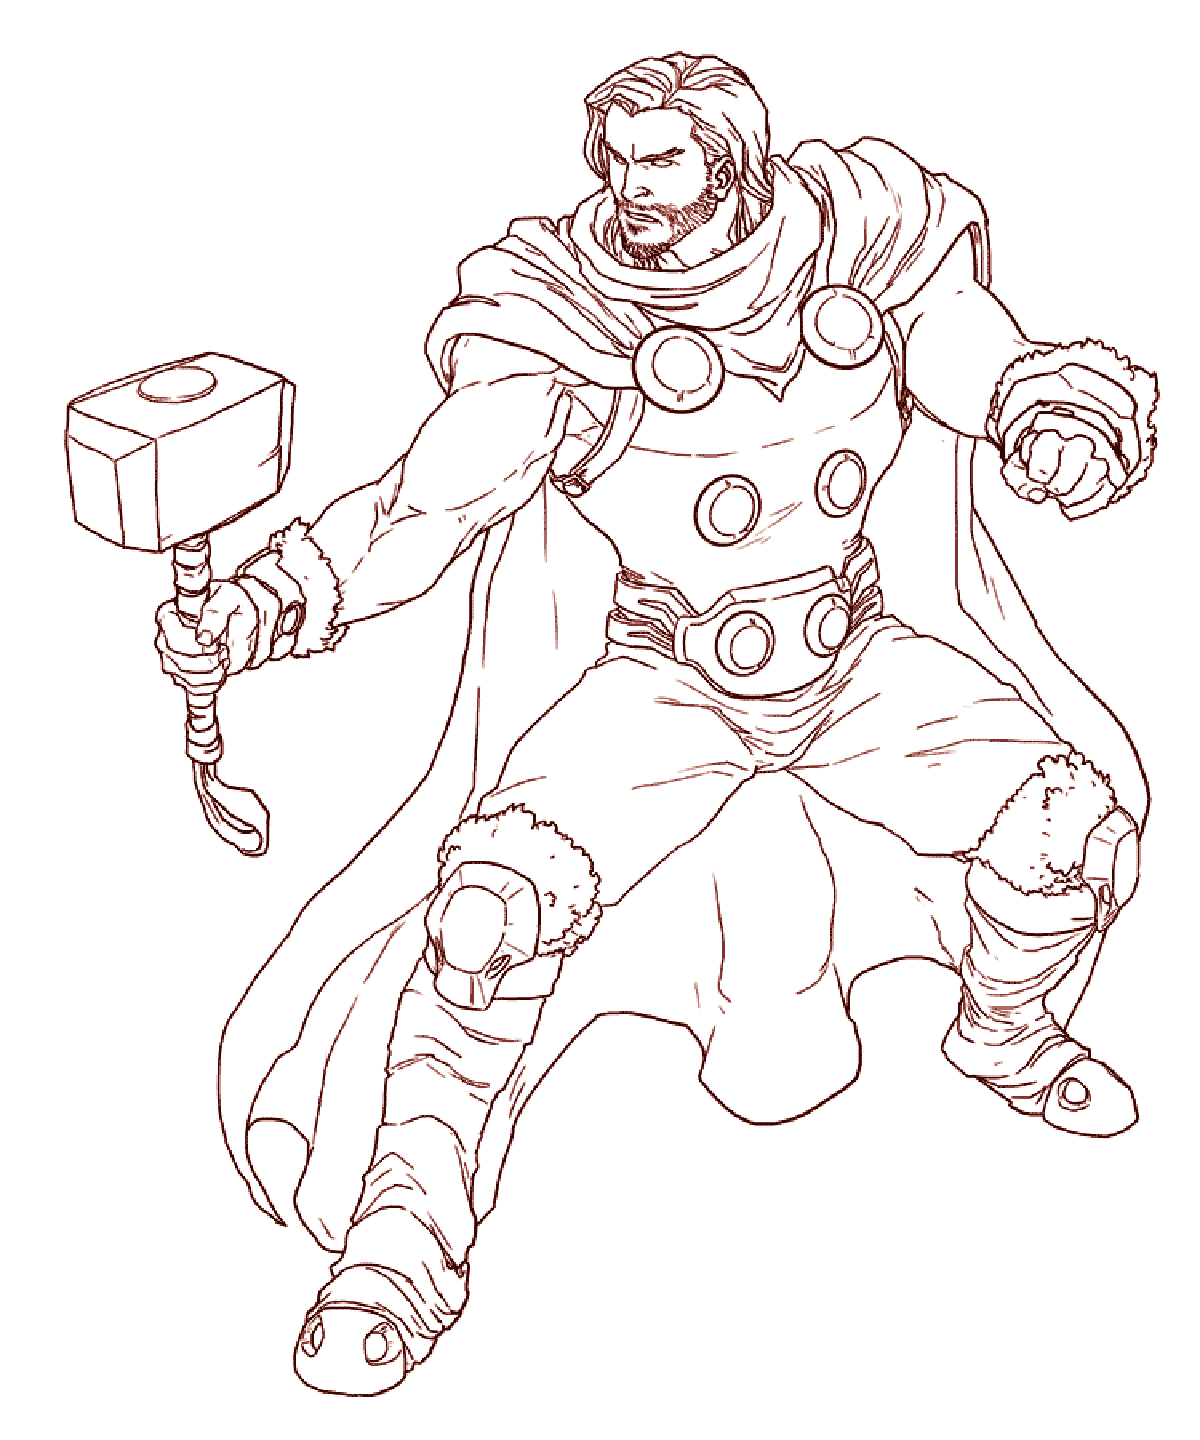 Coloring Page of Thor with his Mjölnir Hammer